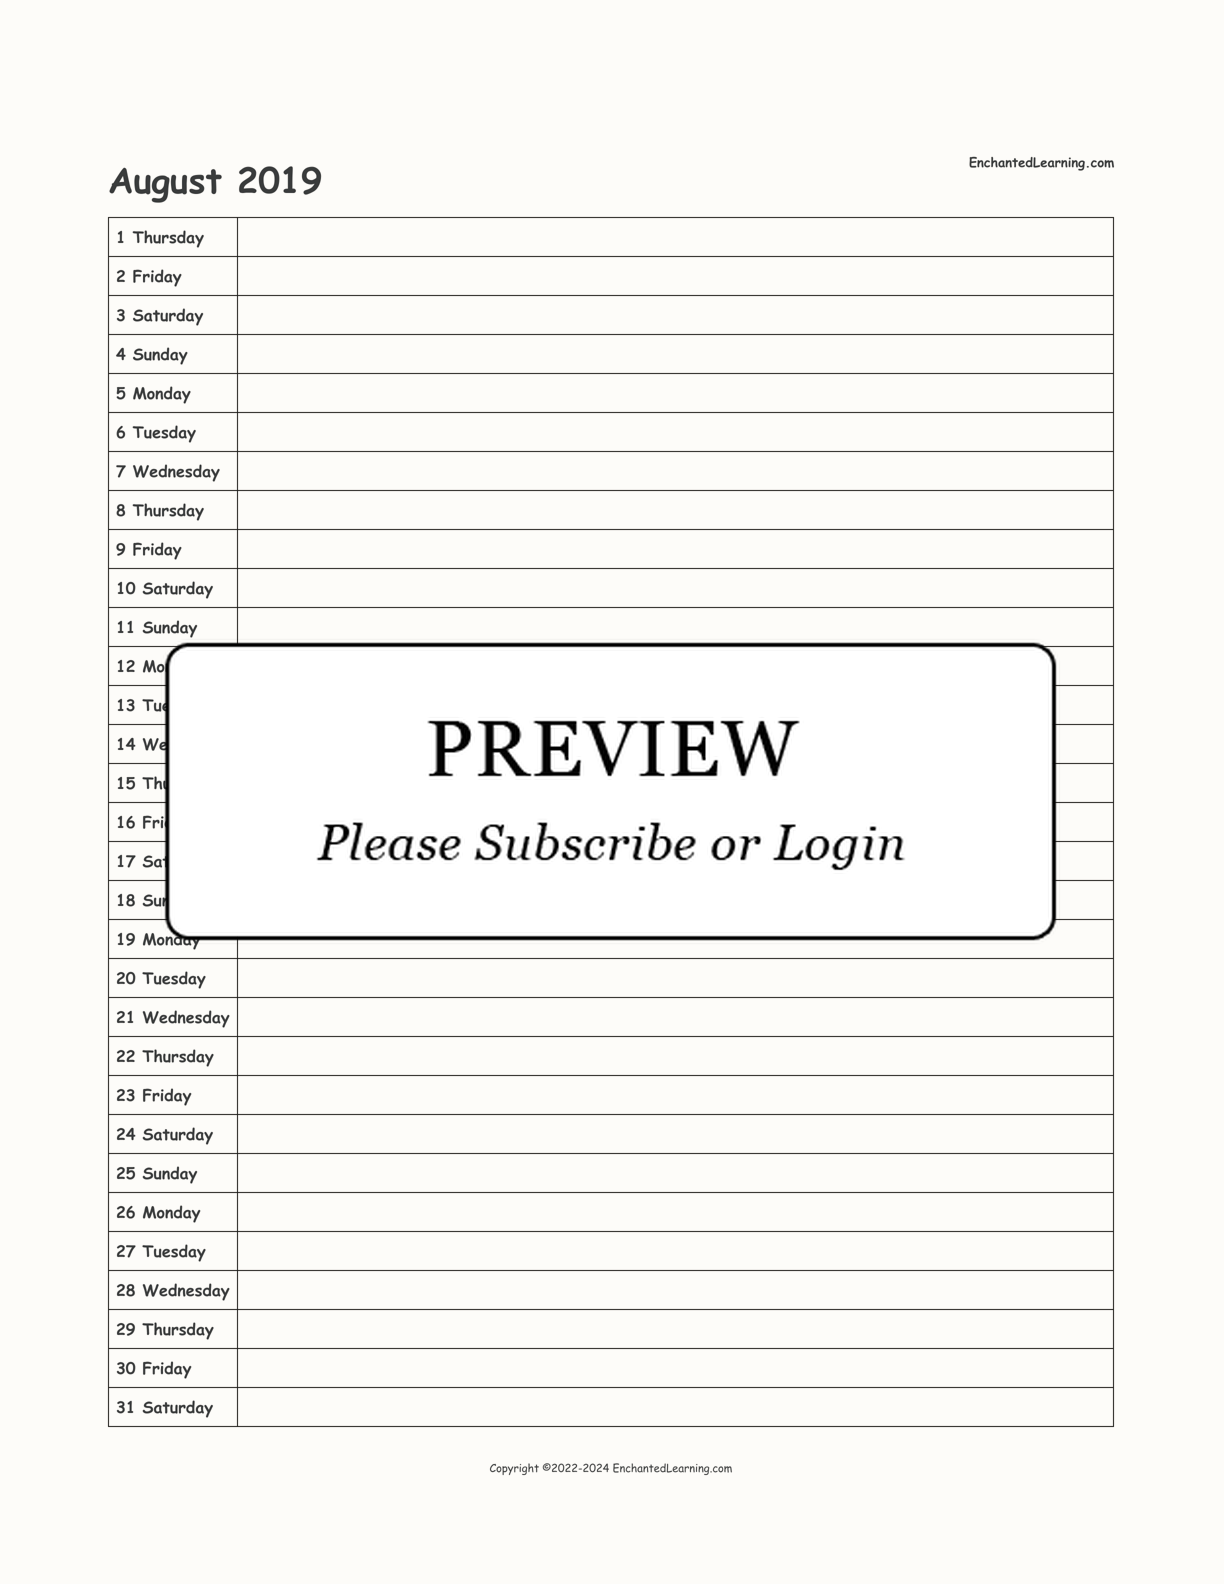 2019 Scheduling Calendar interactive printout page 8